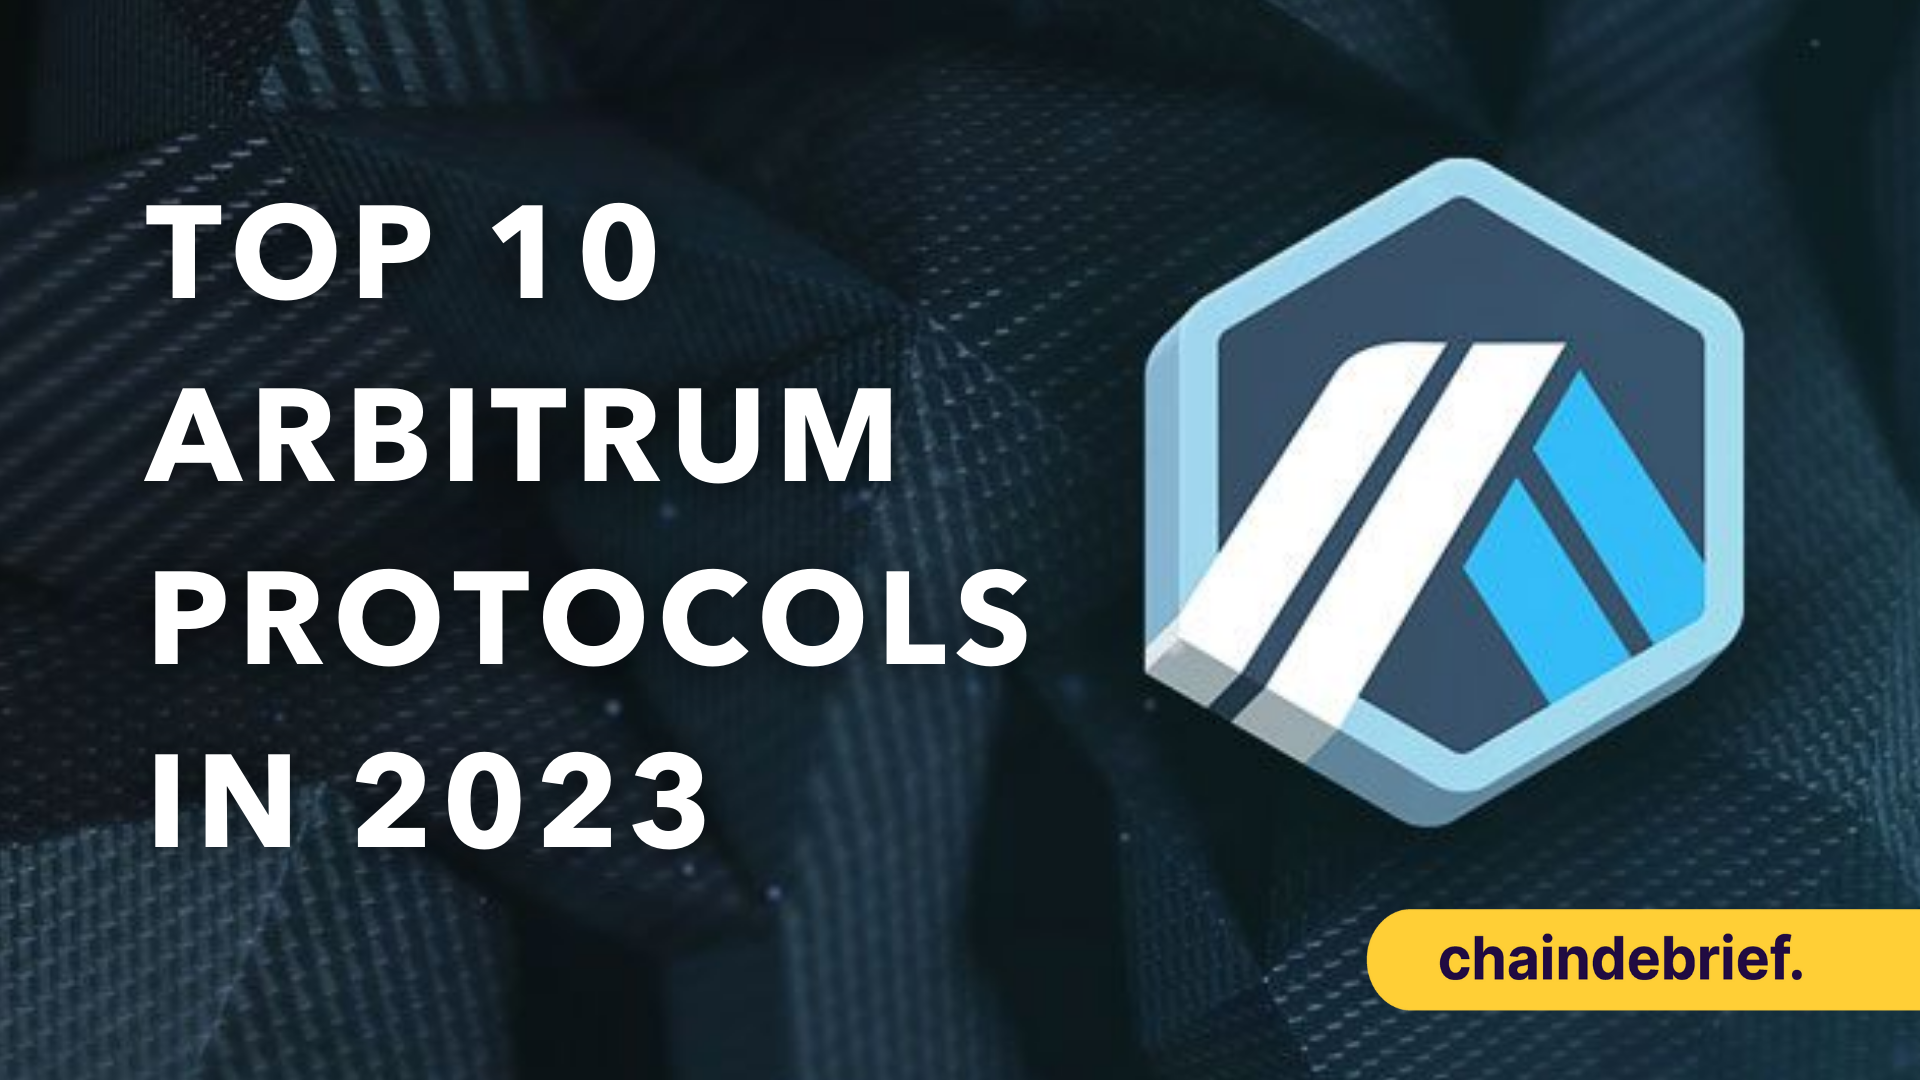 Top 10 Arbitrum Protocols to Look Out for in 2023